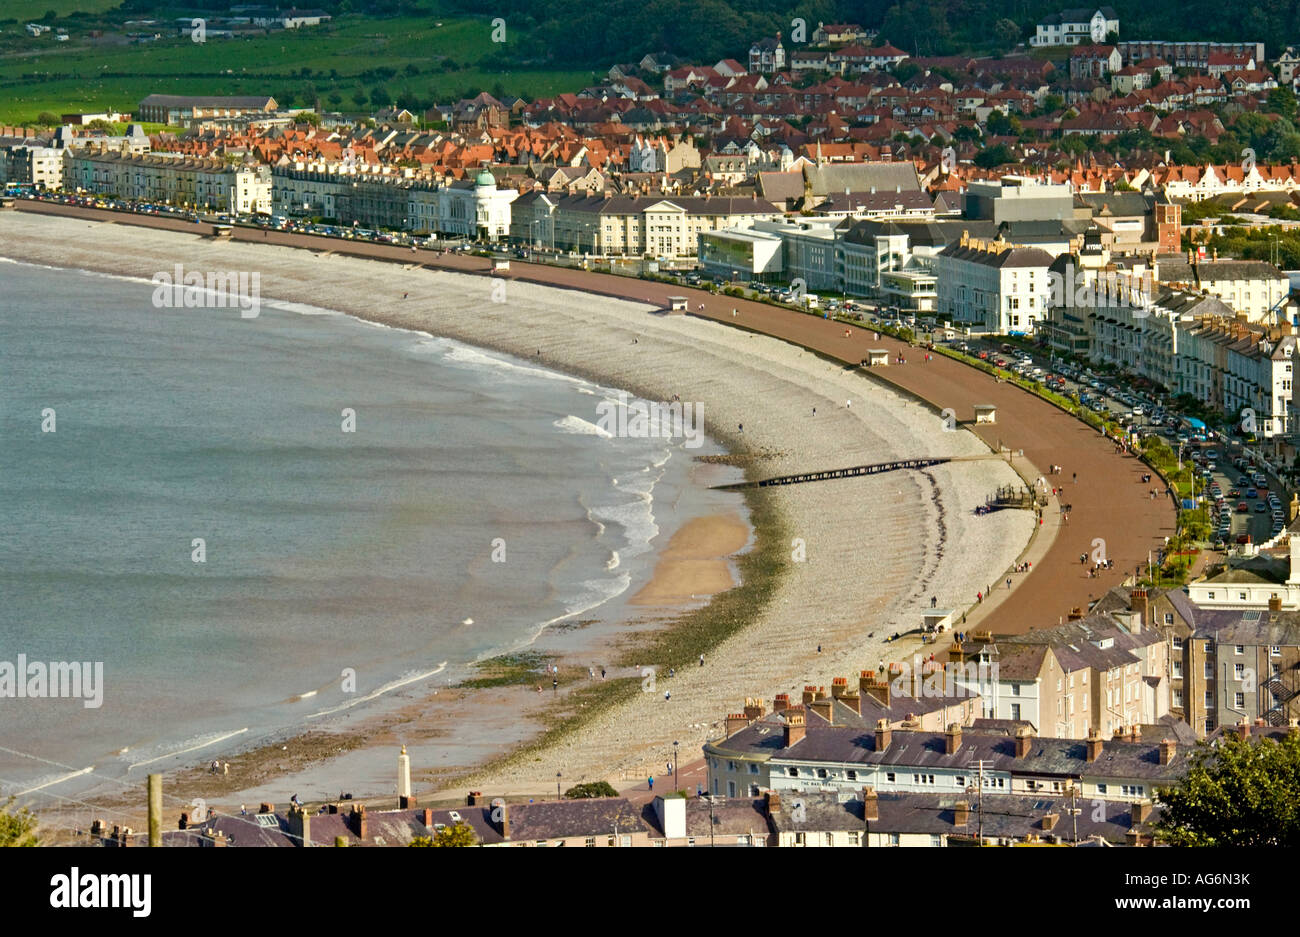 The majestic sweep of the main bay and promenade of Llandudno in Clwyd North Wales. Stock Photo